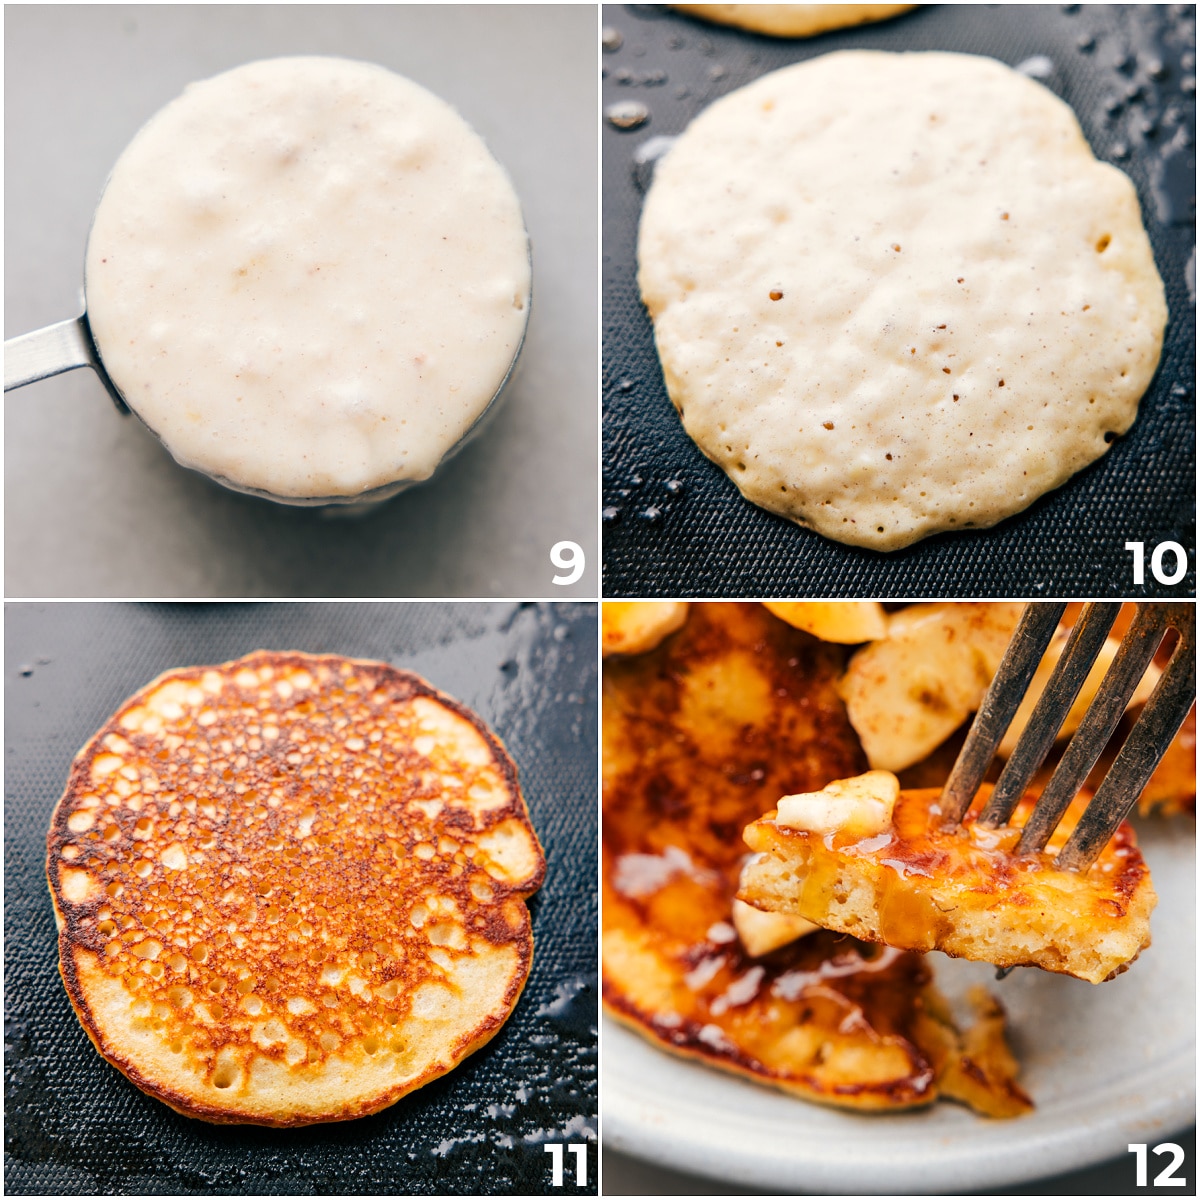 The easy banana pancakes being cooked on a skillet.